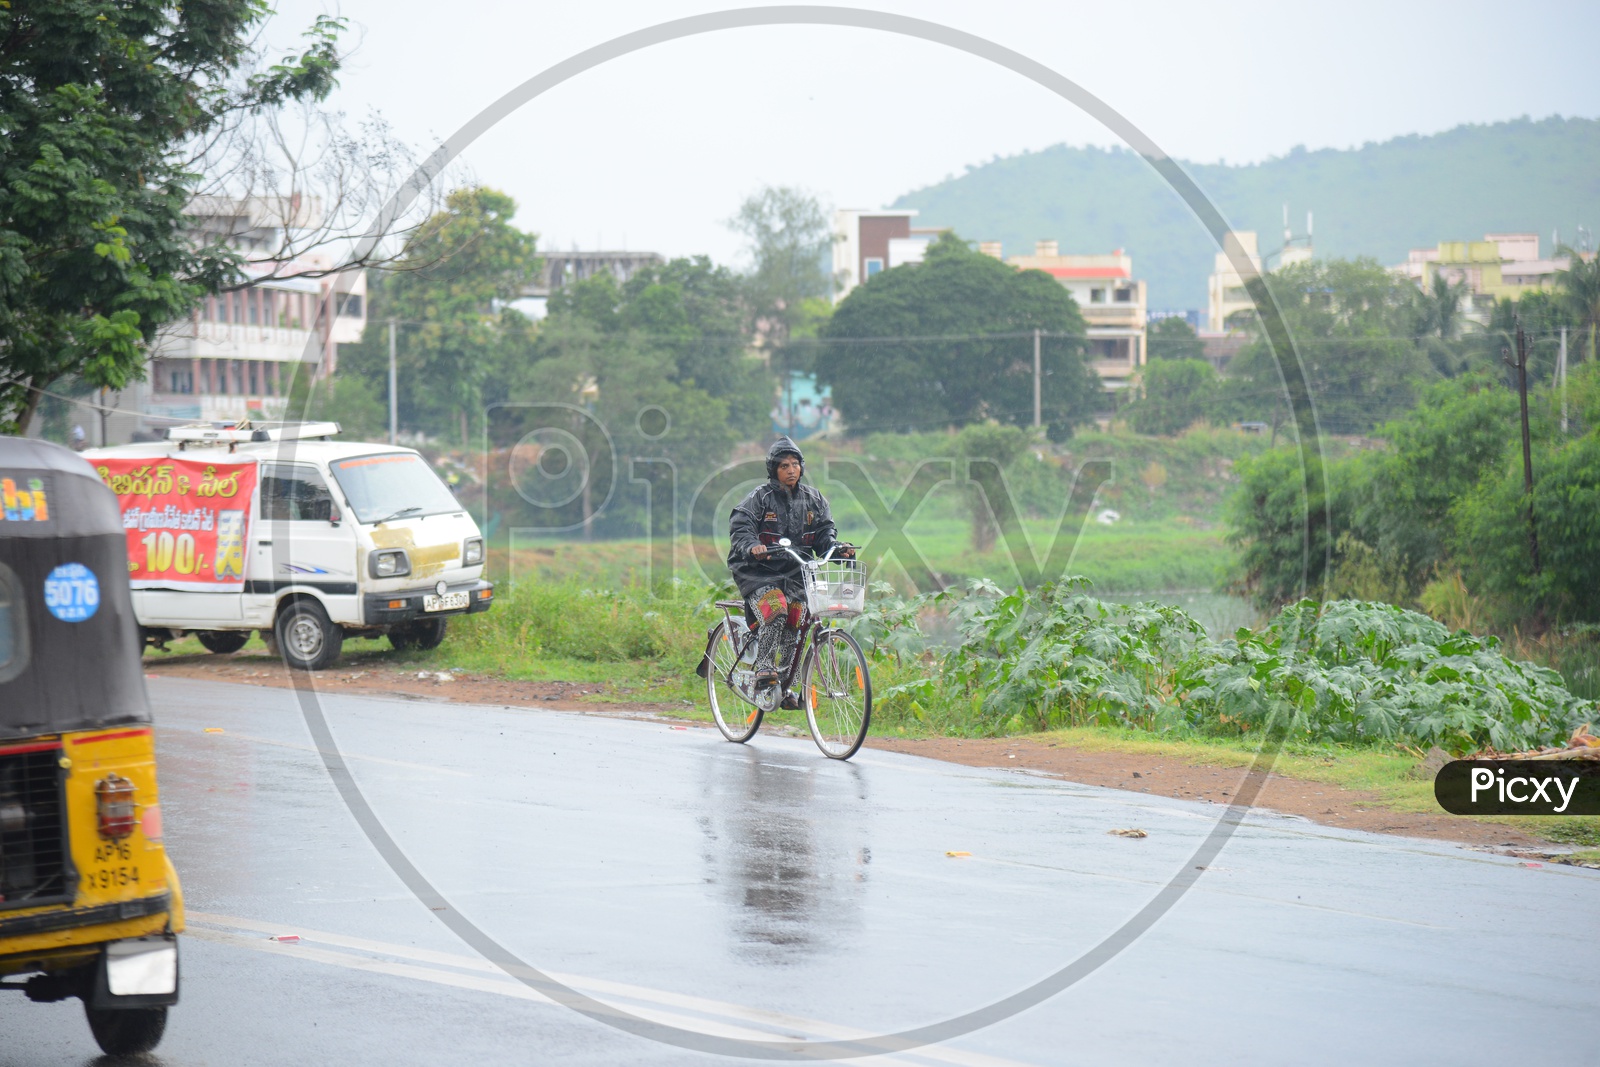 A woman wearing a raincoat and riding a bicycle on road during rain